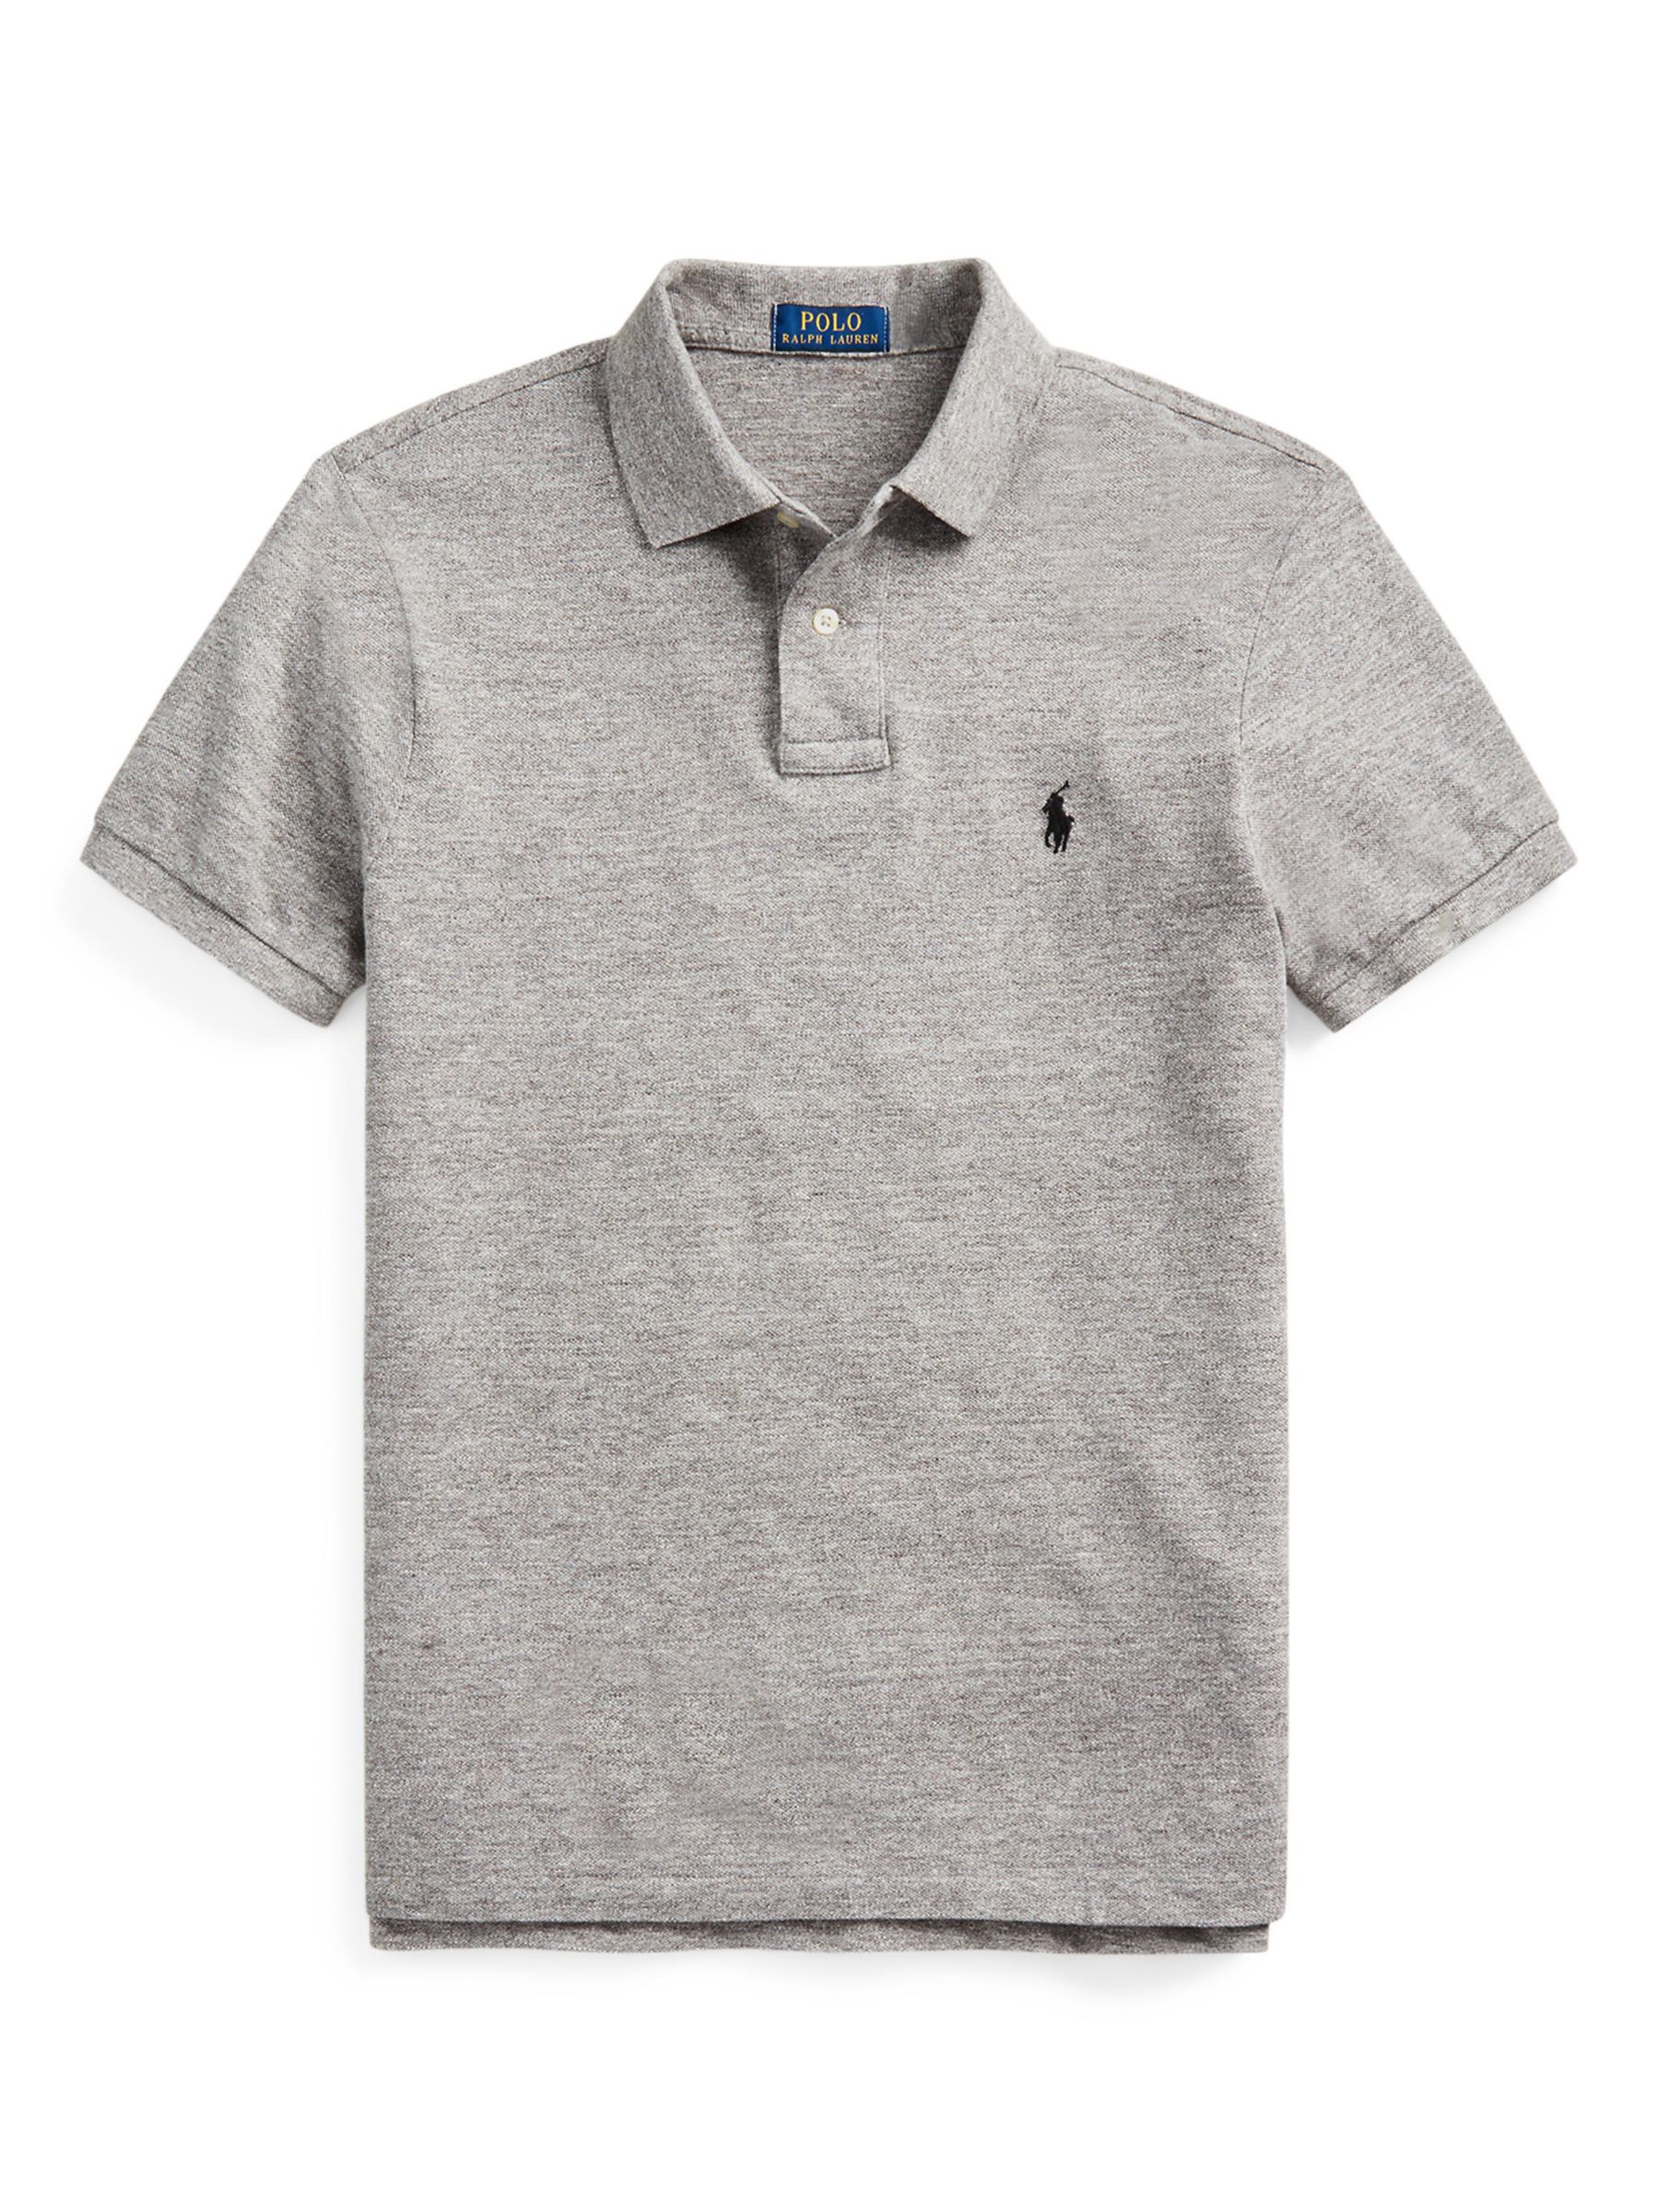 Polo Ralph Lauren Slim Fit Polo Top, Canterbury Heather at John Lewis ...